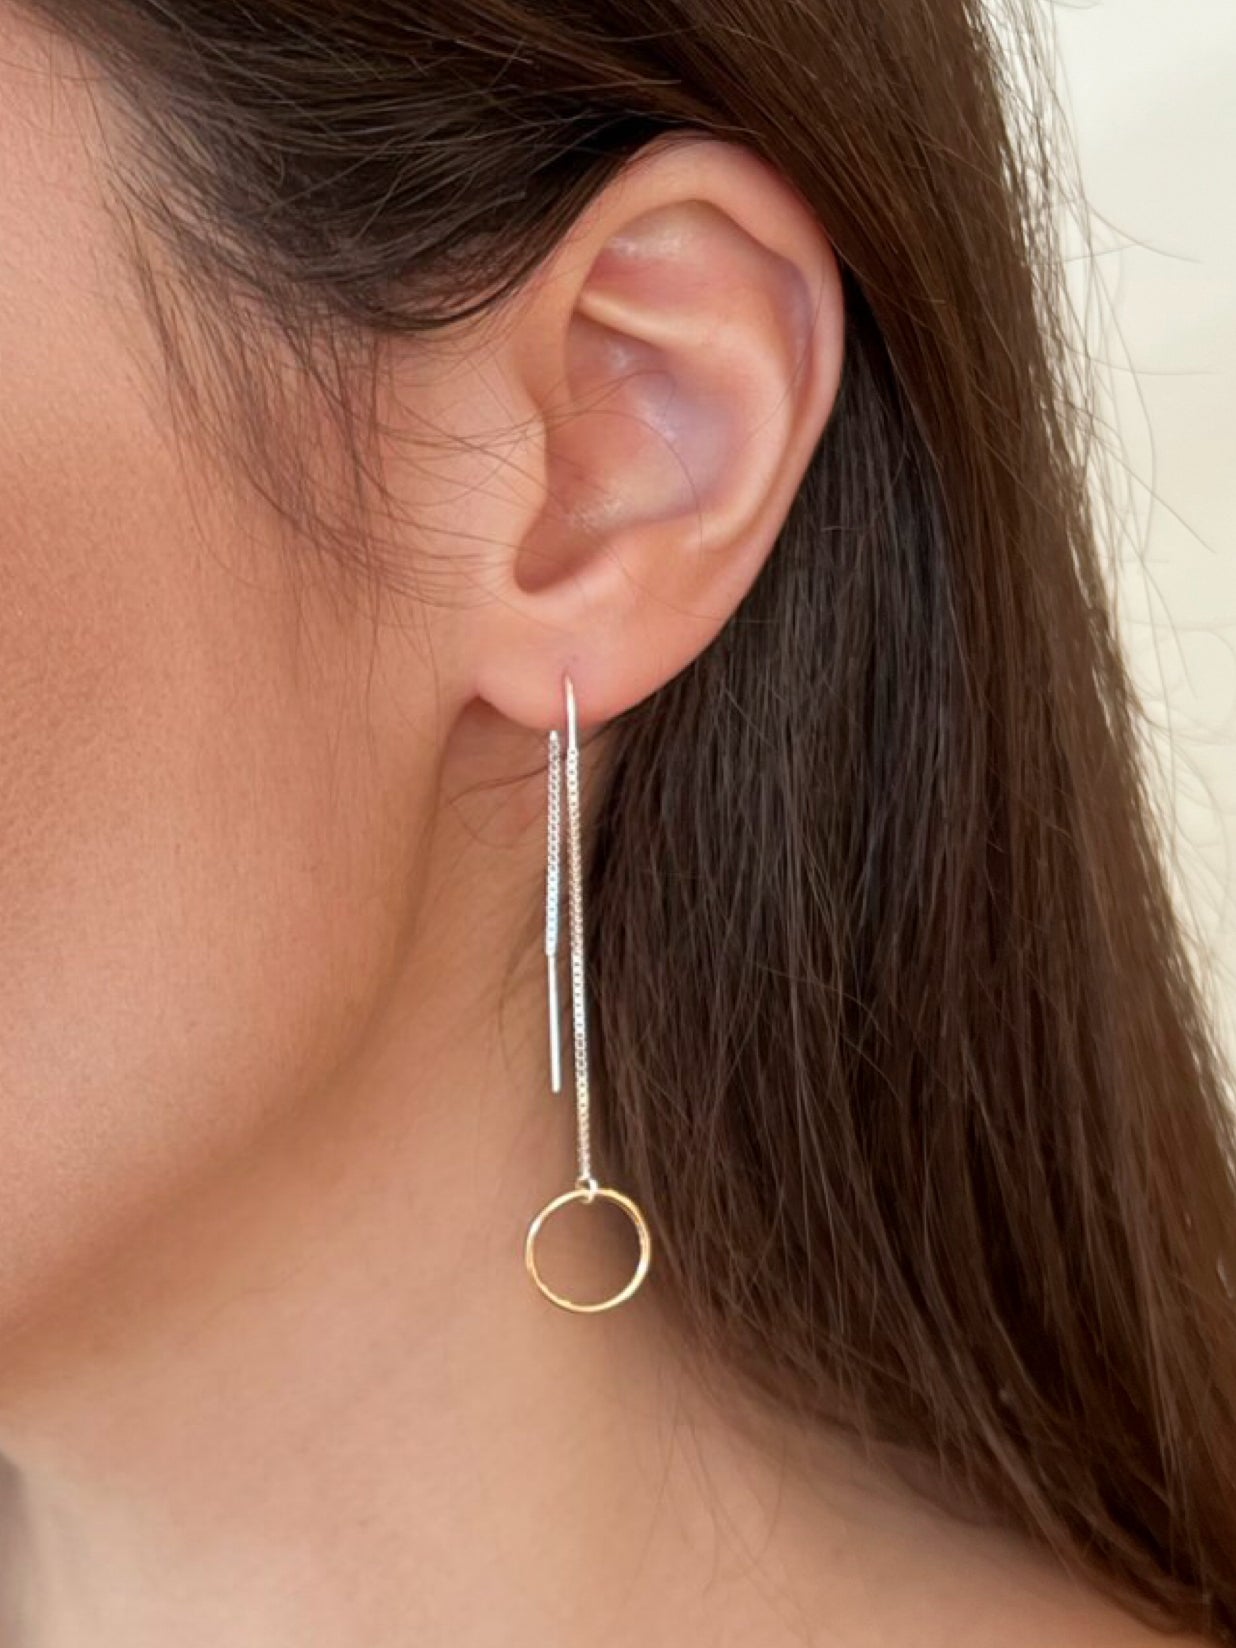 Mixed metal gold and silver long dangle earrings.  Model is wearing long silver threader earrings with 14k gold filled ring in front